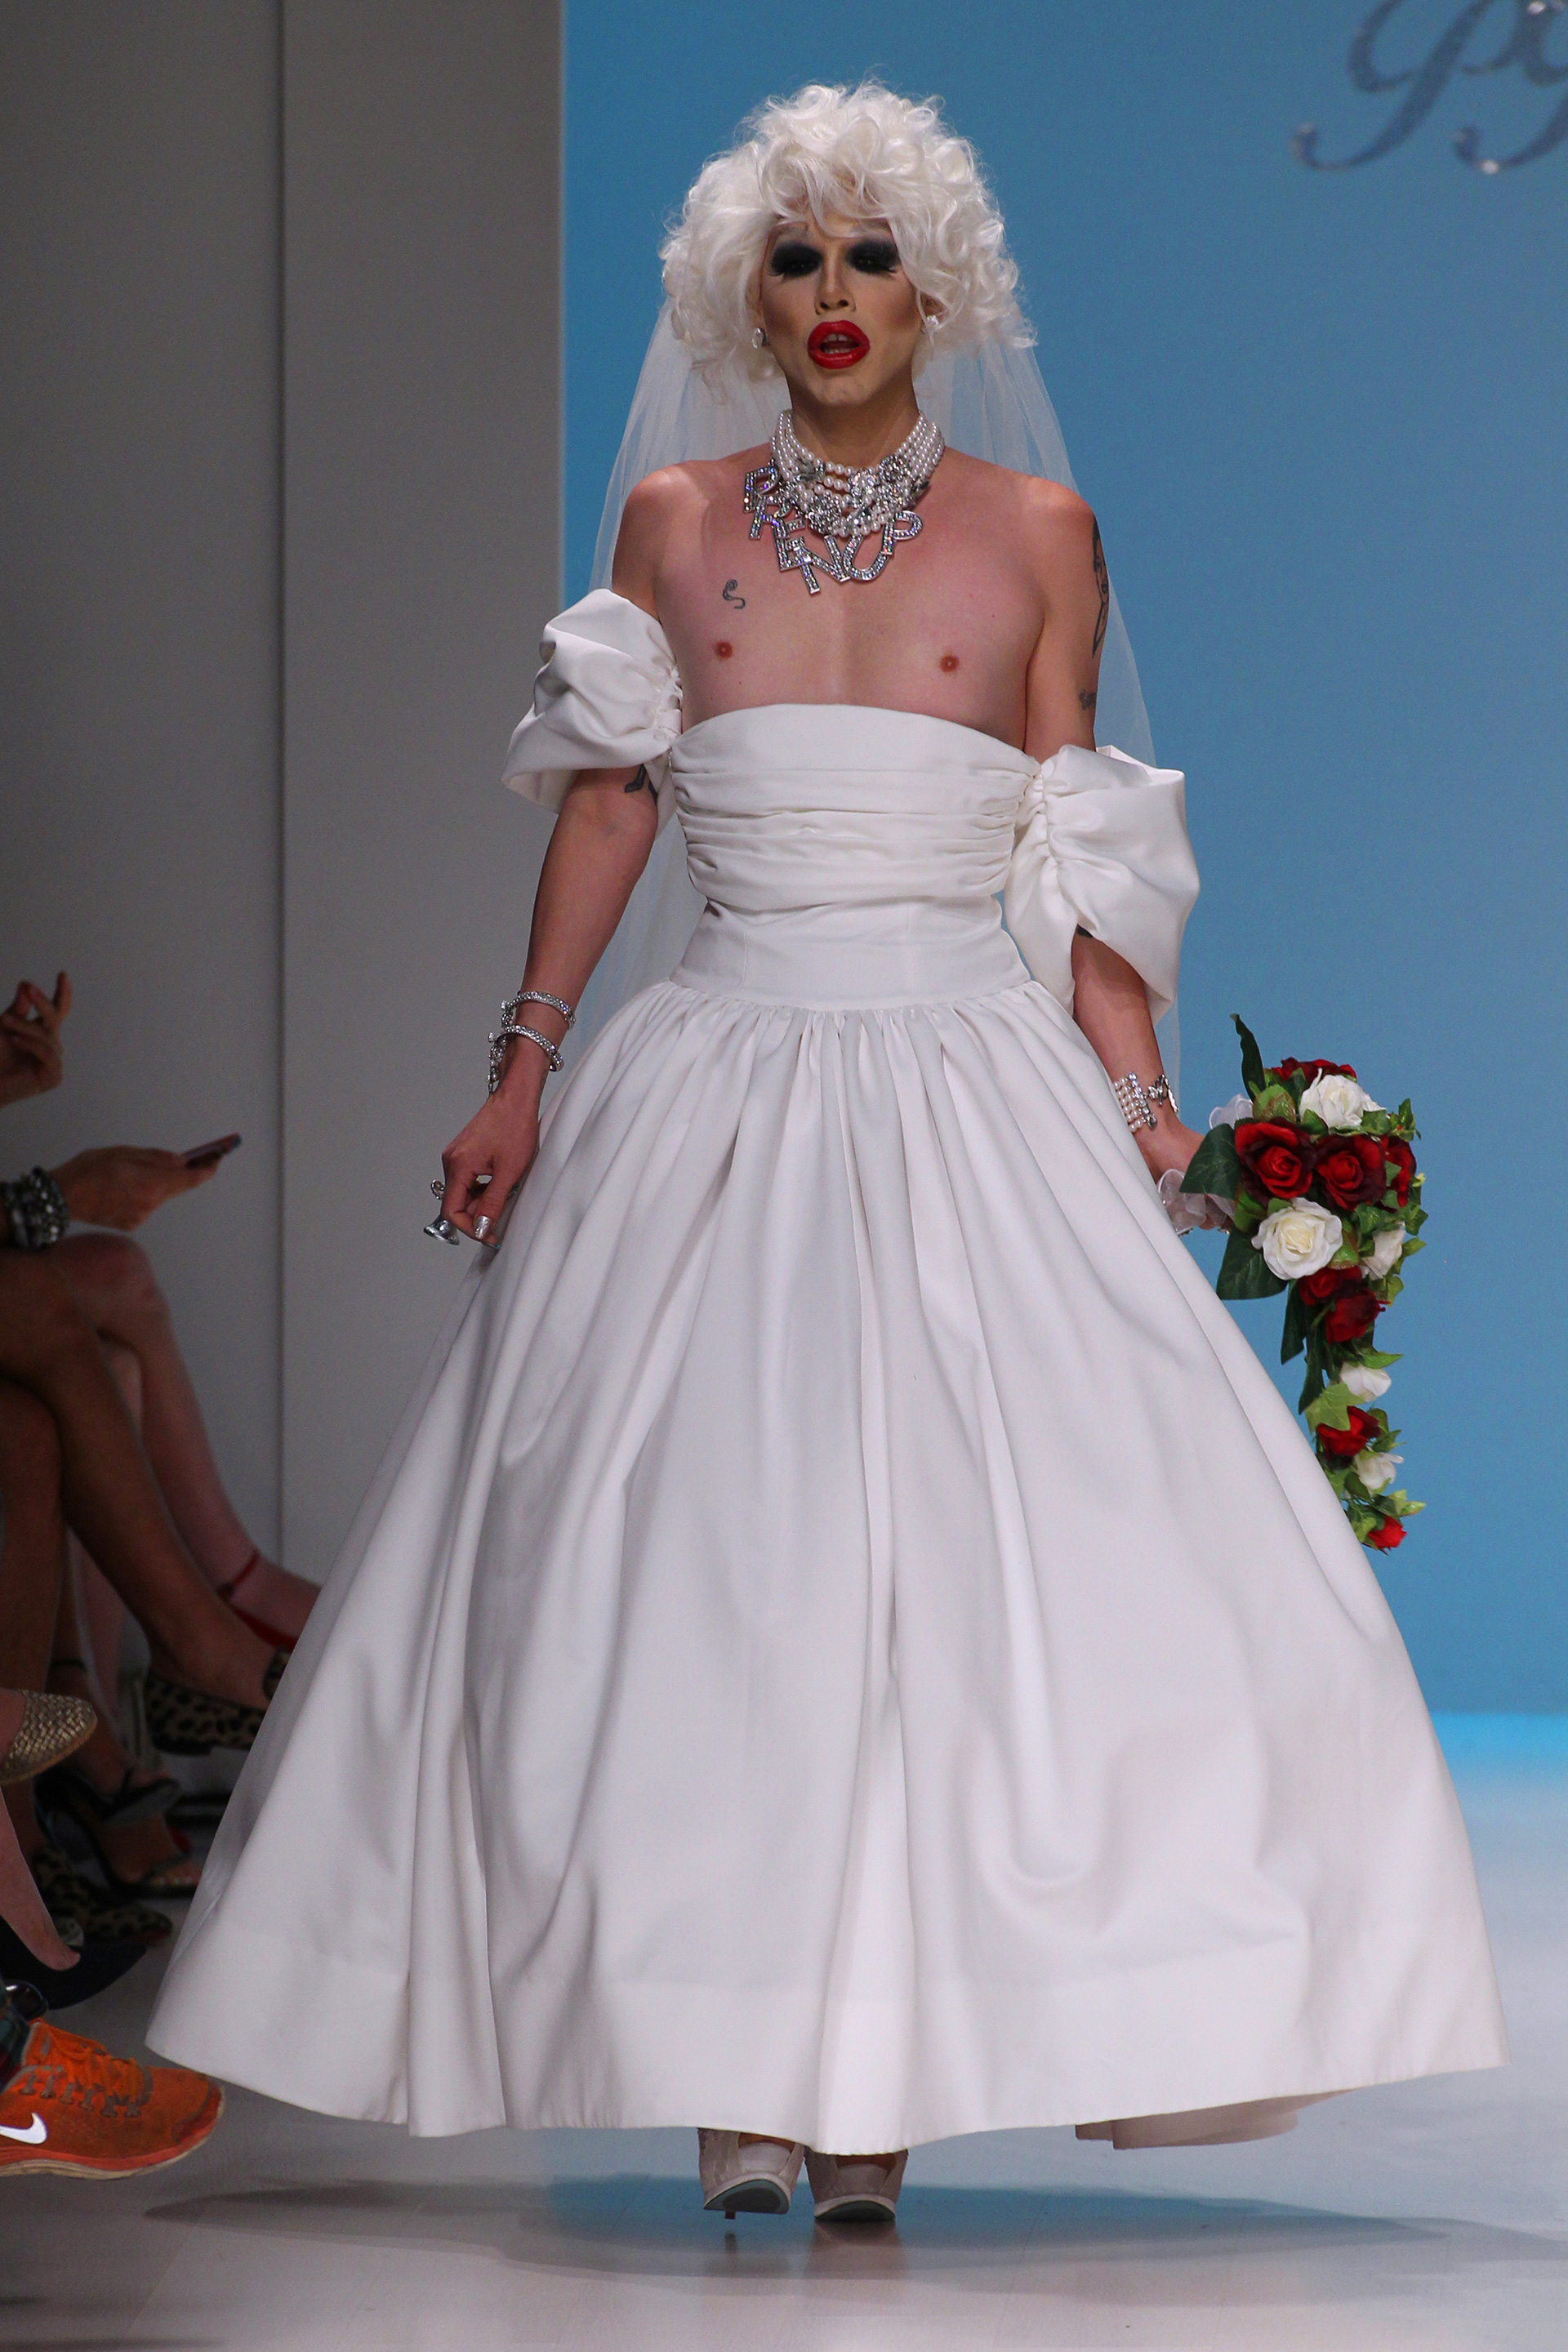 Betsey Johnson Tackles Gay Marriage In Her Fashion Week Show